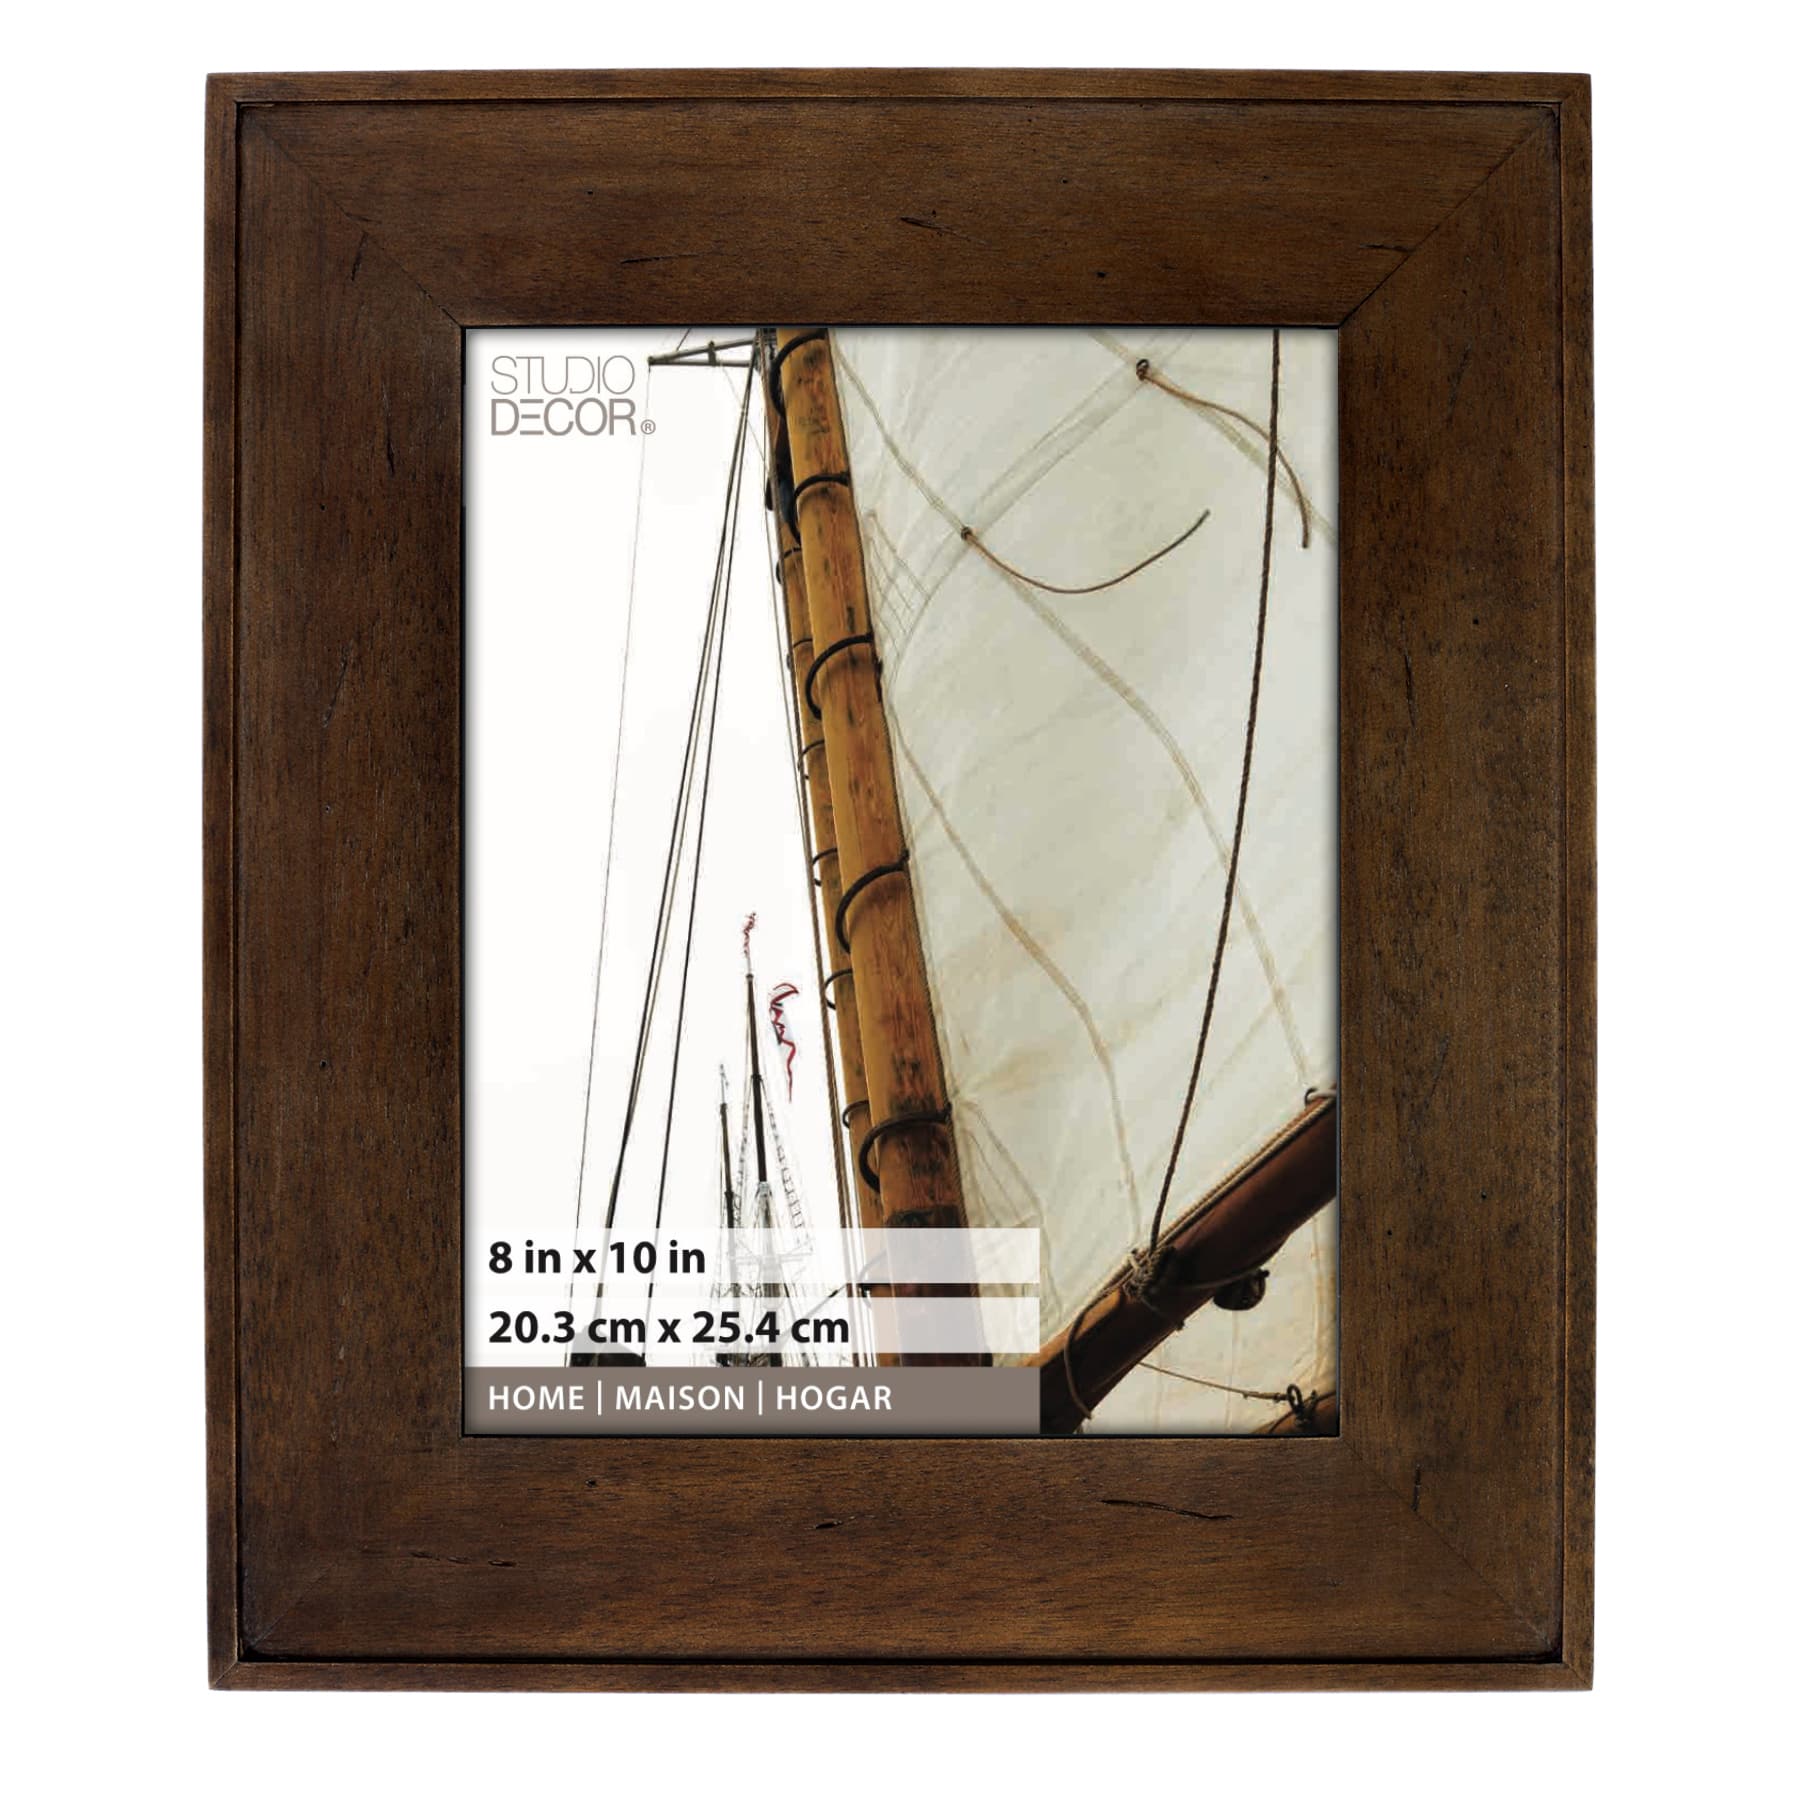 11 x 14 inches. Catalina natural wood Details about   Picture Frame by Studio Decor 